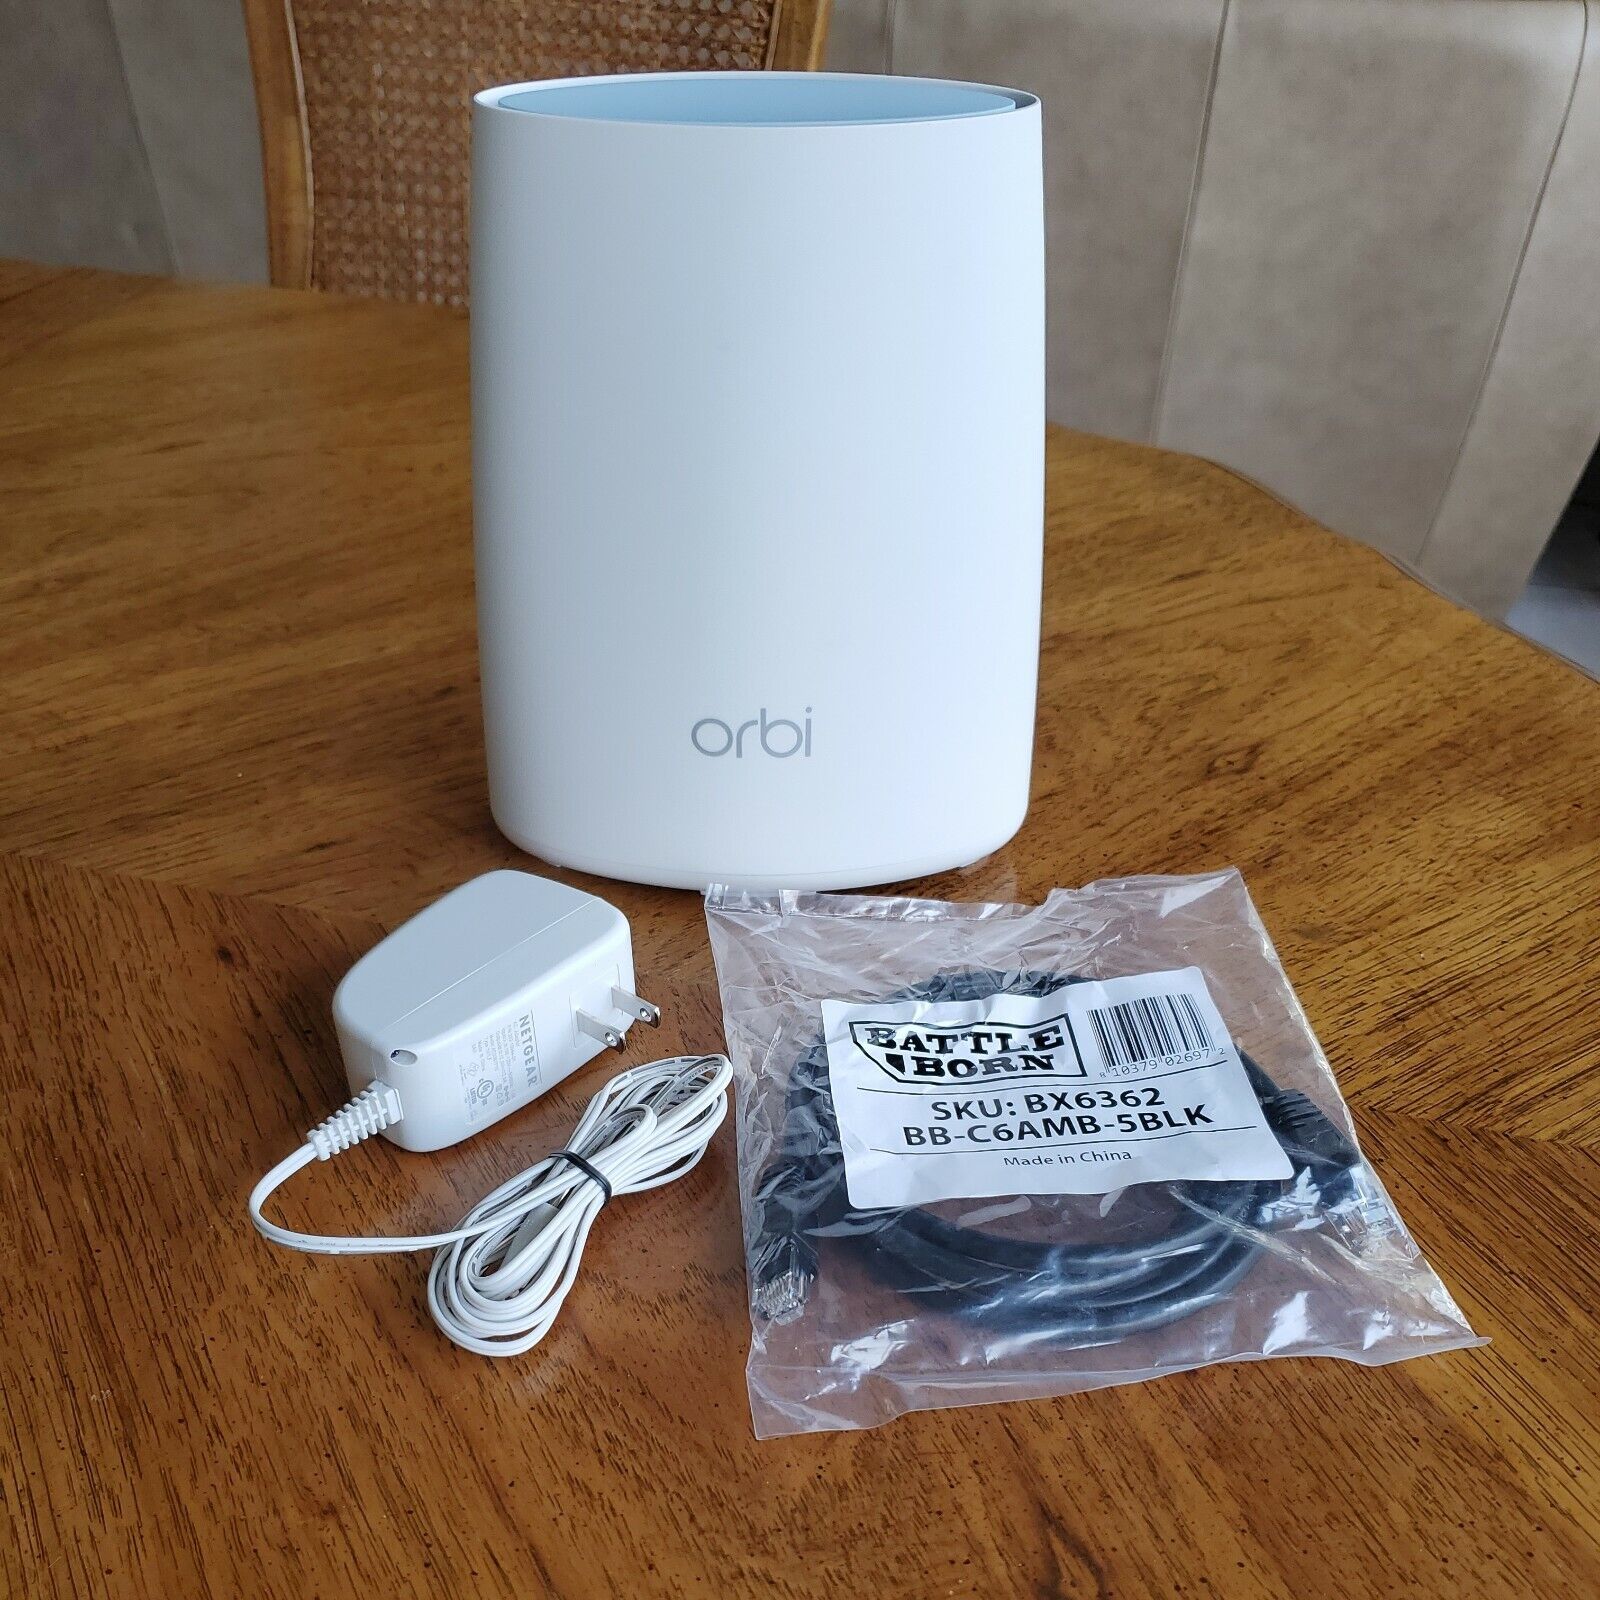 NETGEAR Orbi RBR40 Router AC2200 Mesh Network with WiFi 5 ~ Very Good Condition